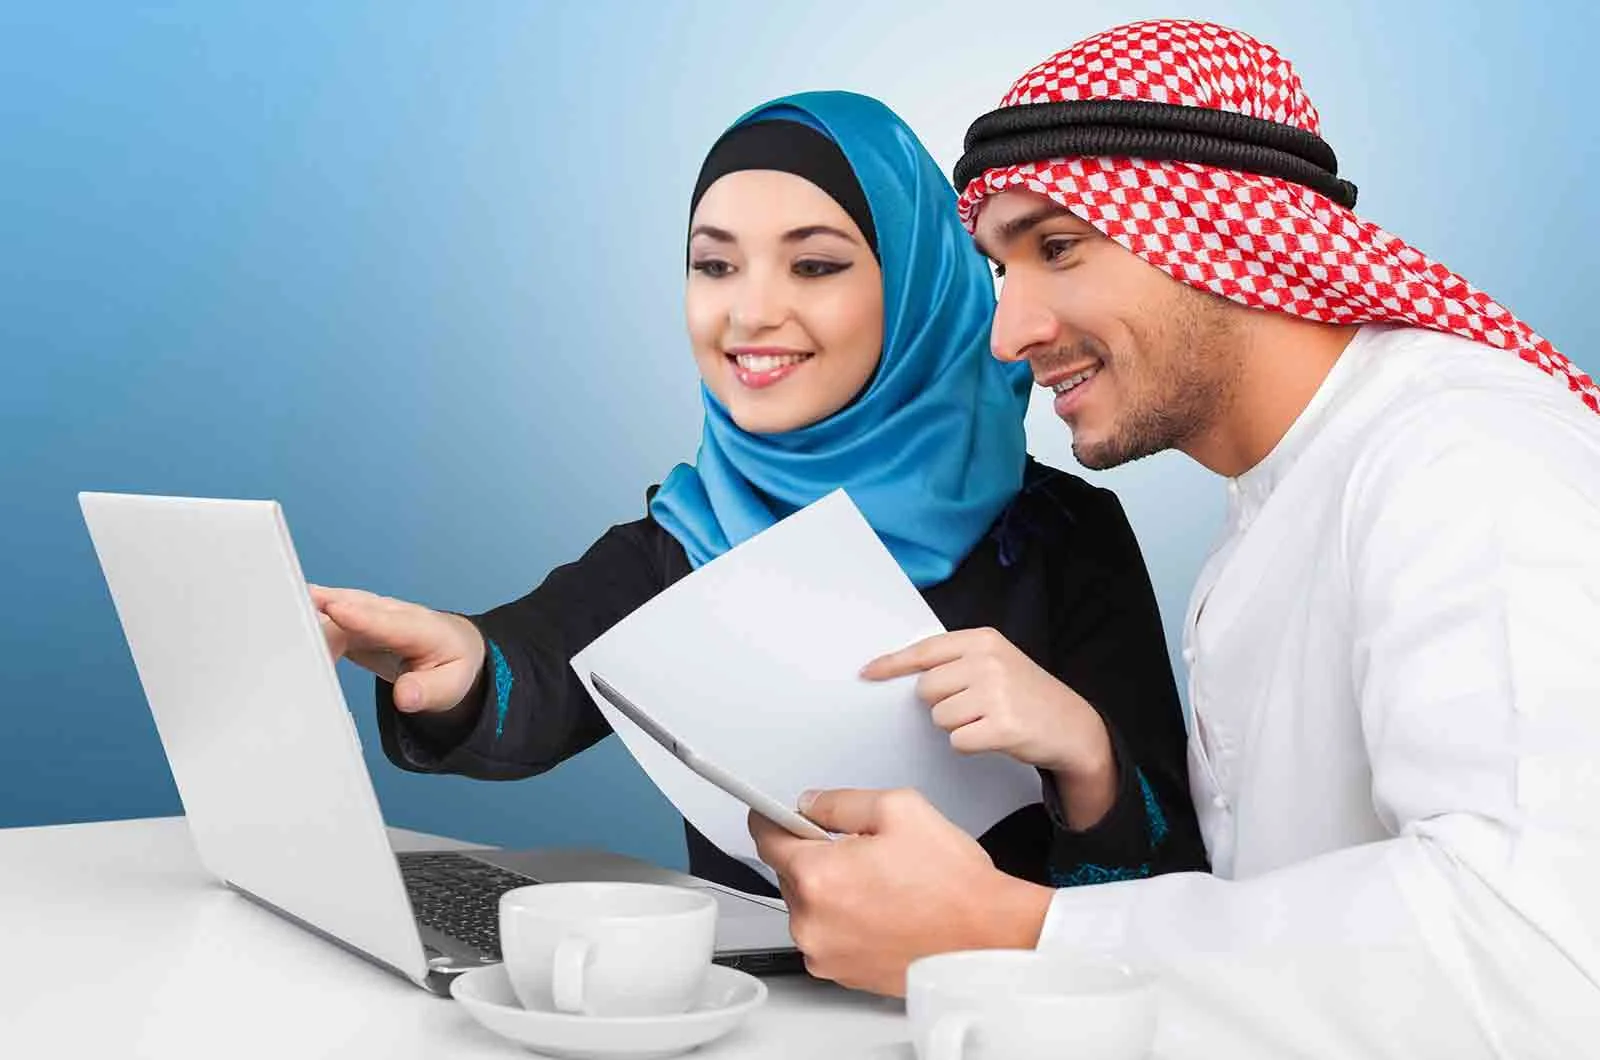 A girl wearing hijab and a guy wearing traditional Arabic clothing, sitting on a desk with a laptop. Concept of English to Arabic translation.